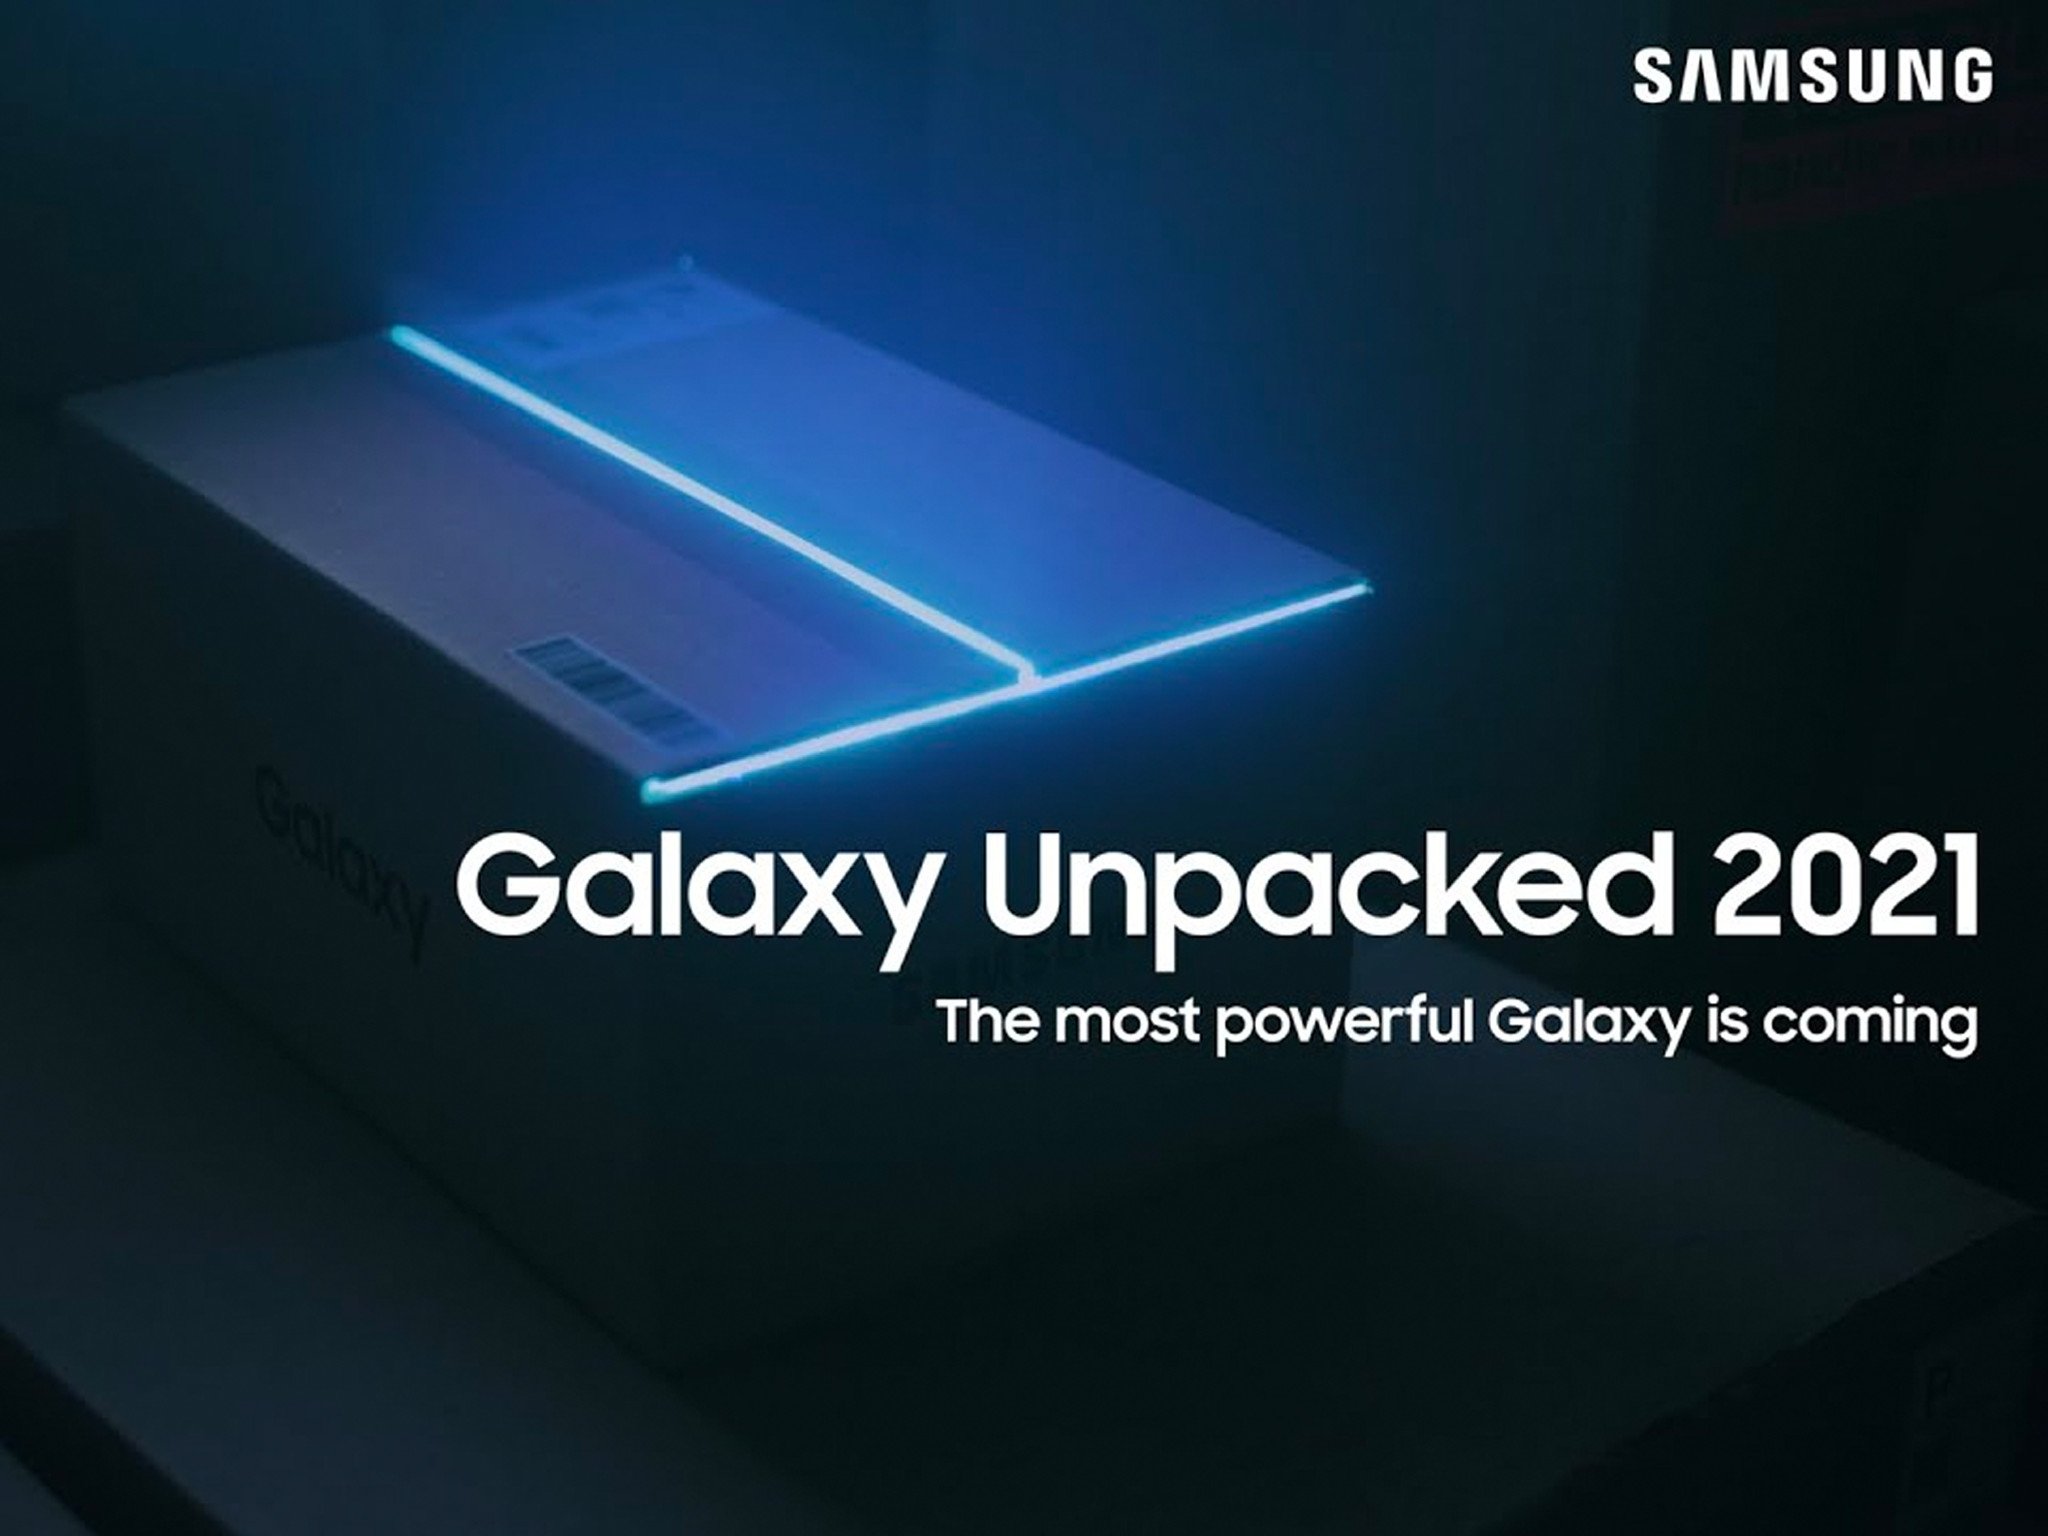 Register now to watch Samsung’s latest Galaxy Unpacked livestream and earn 